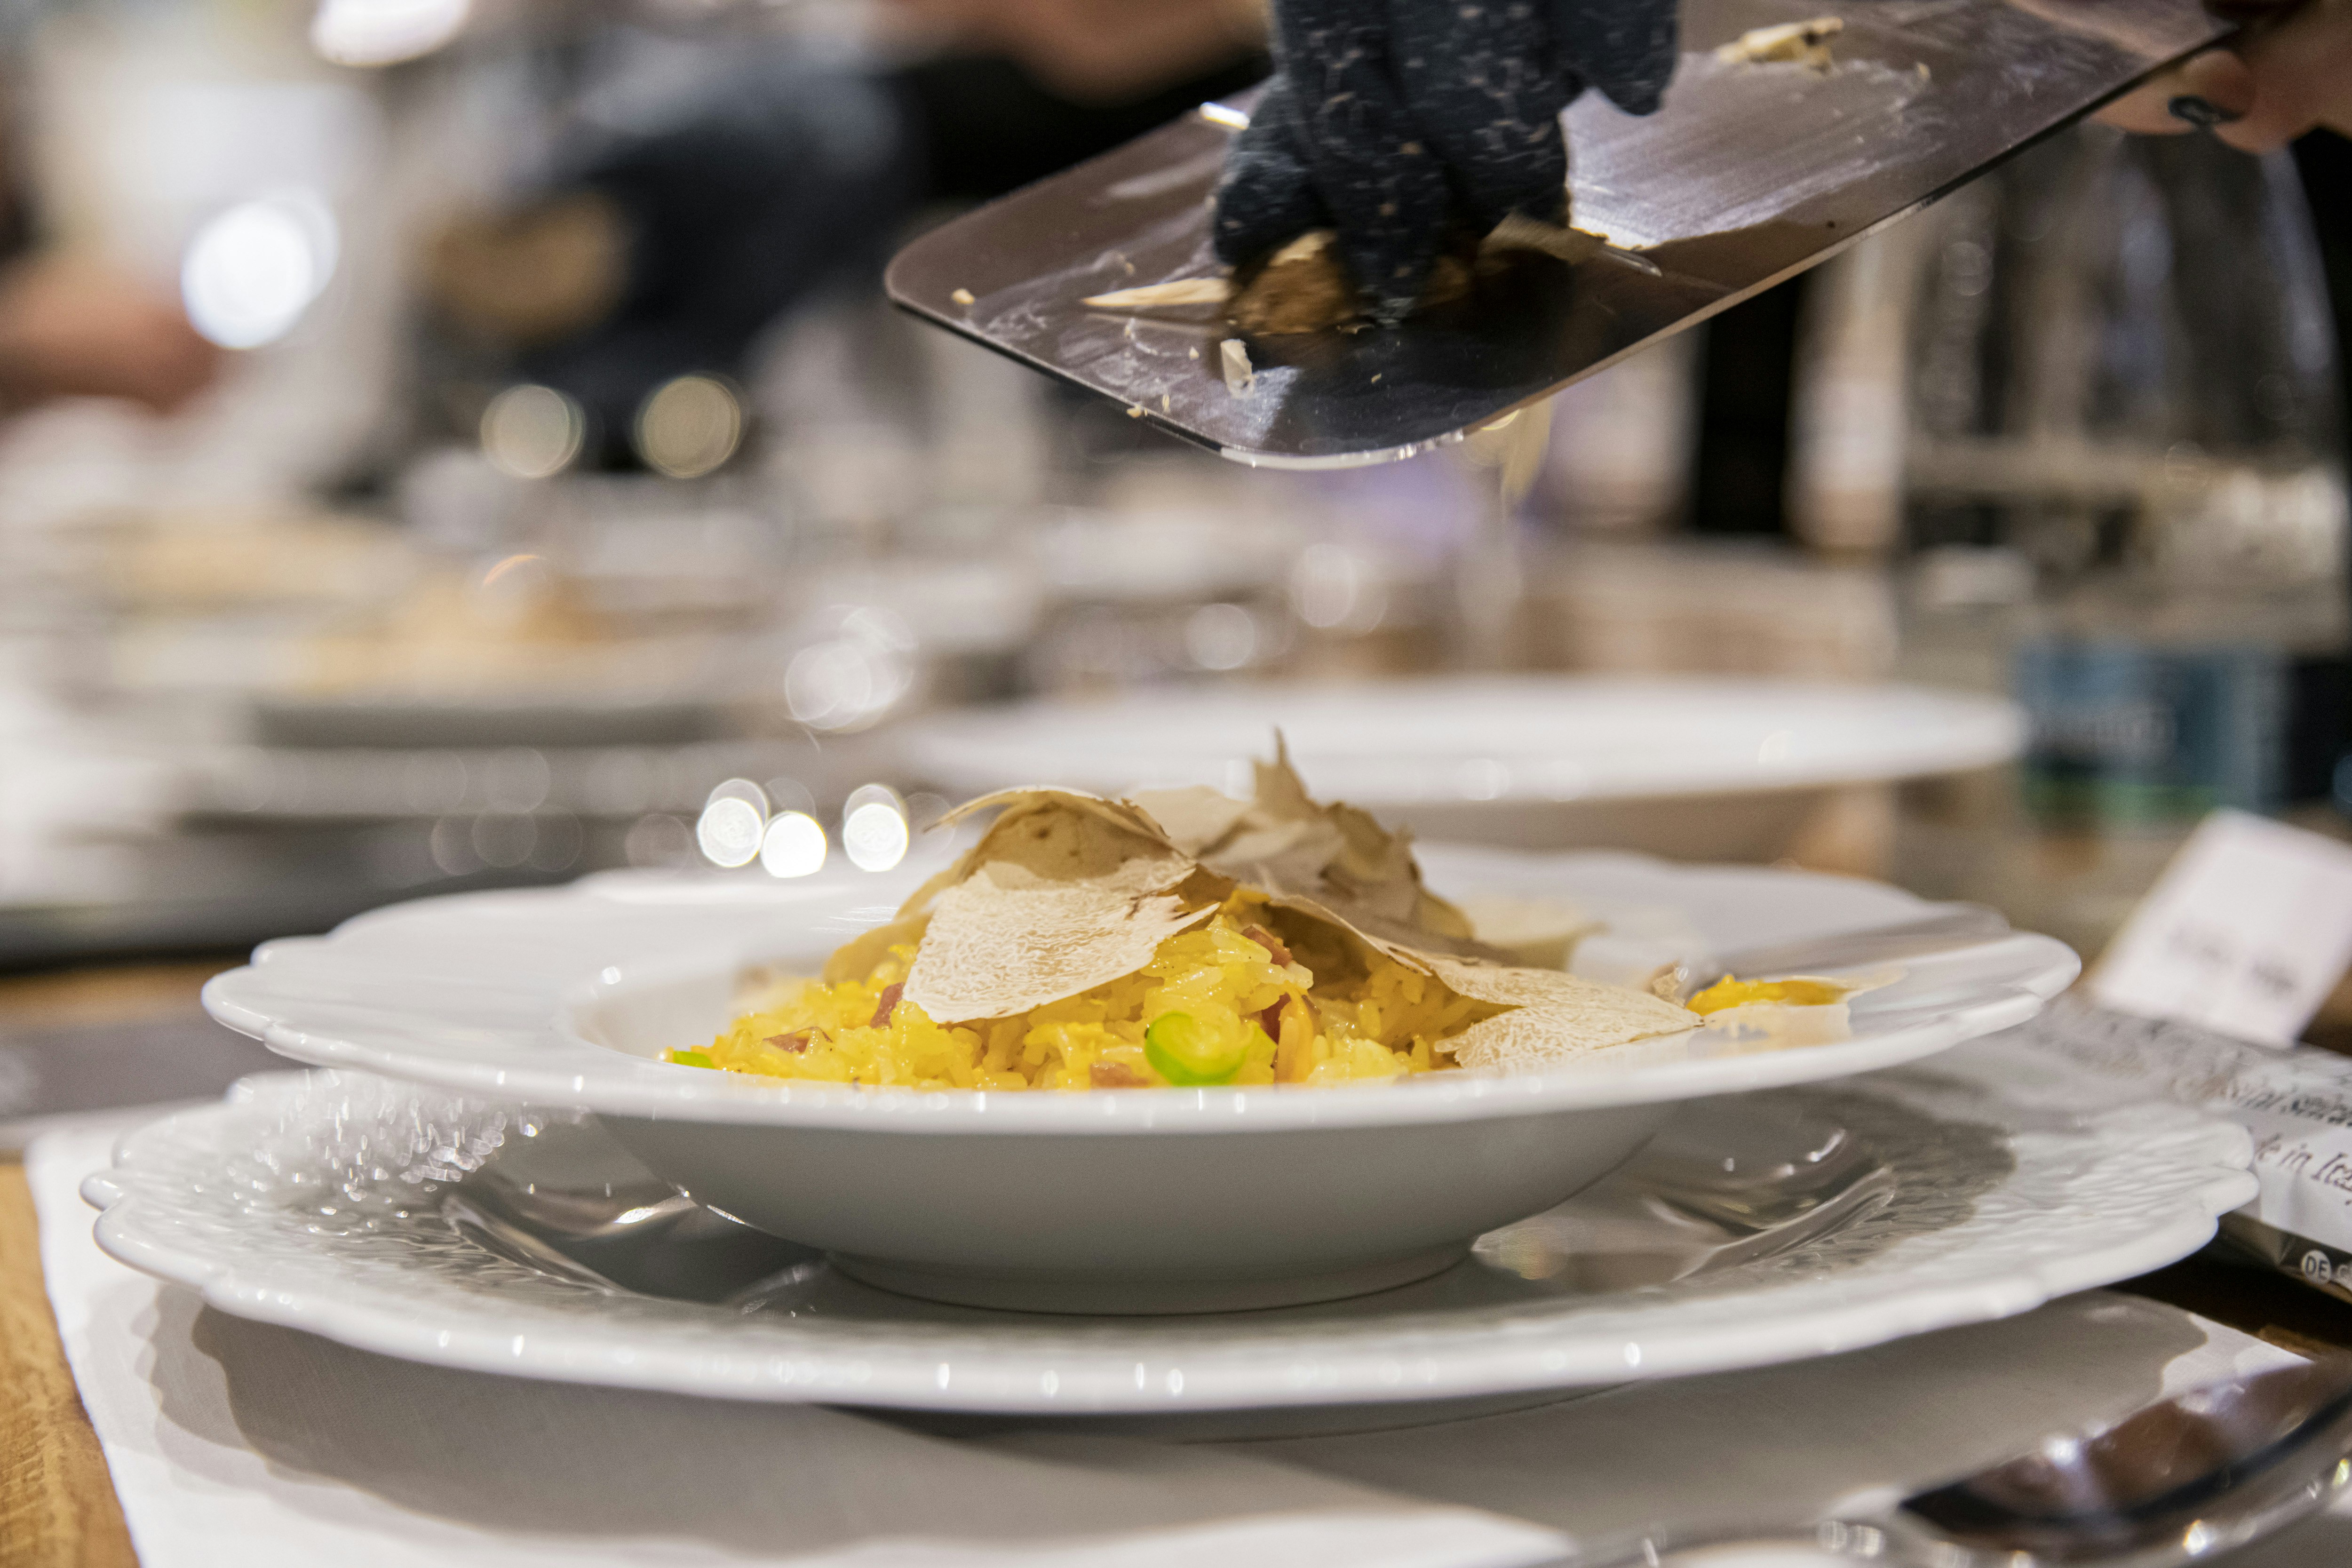 Seasonal white truffle being grated on top of a risotto, regional food in Italy